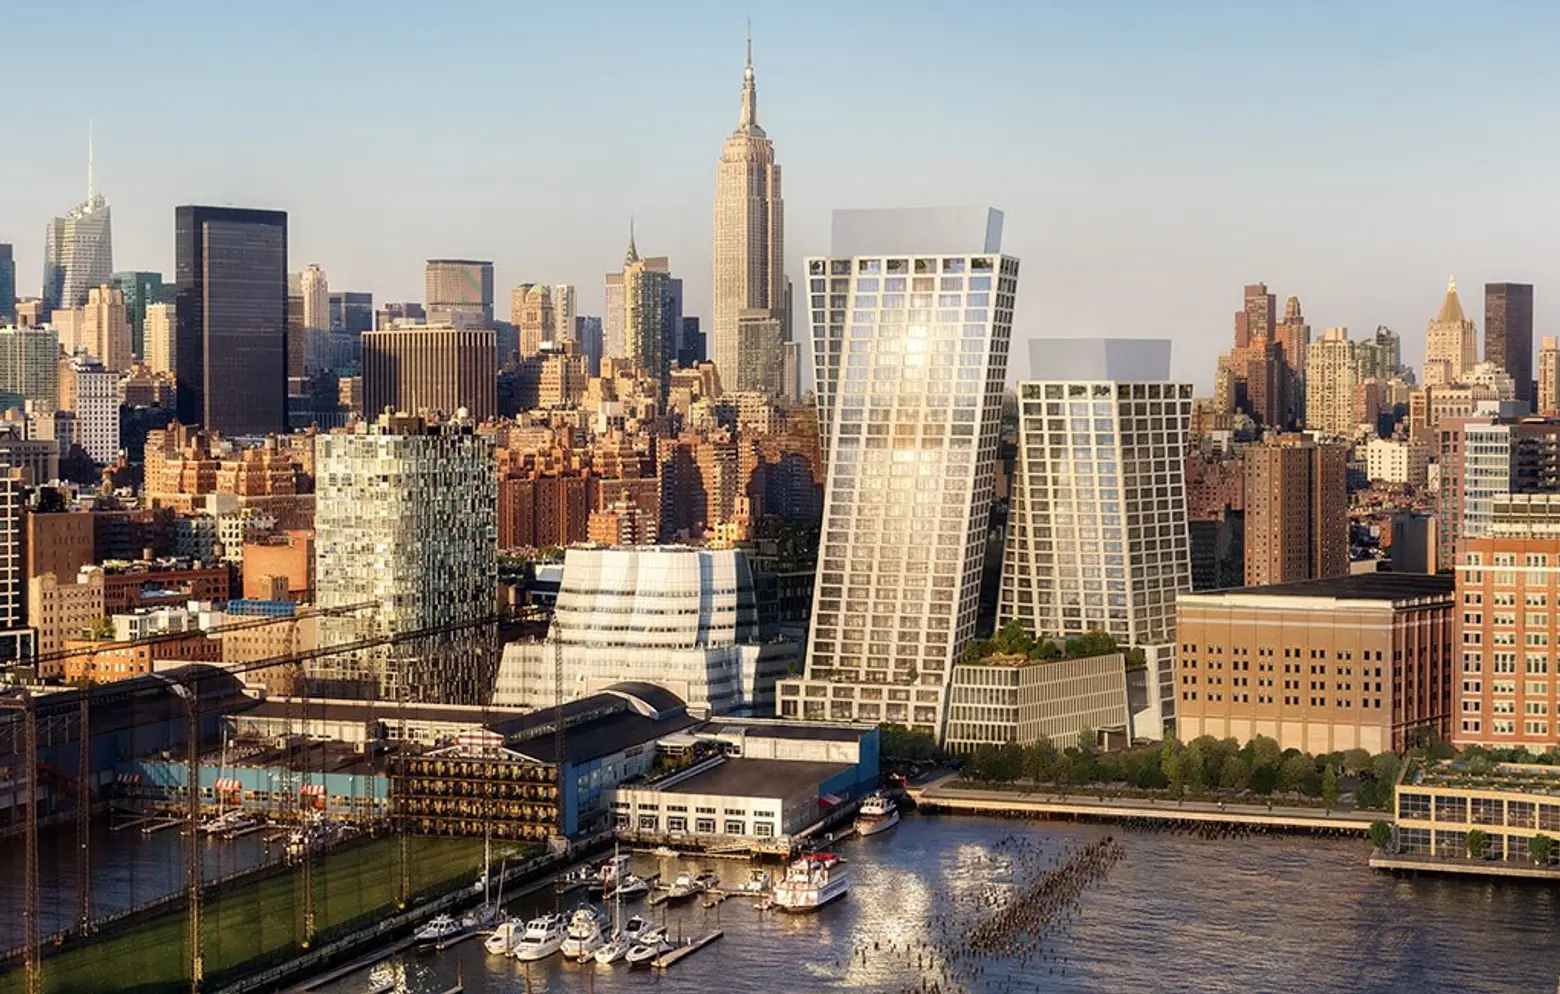 Bjarke Ingels reveals new rendering for West Chelsea hotel/condo project, The Eleventh